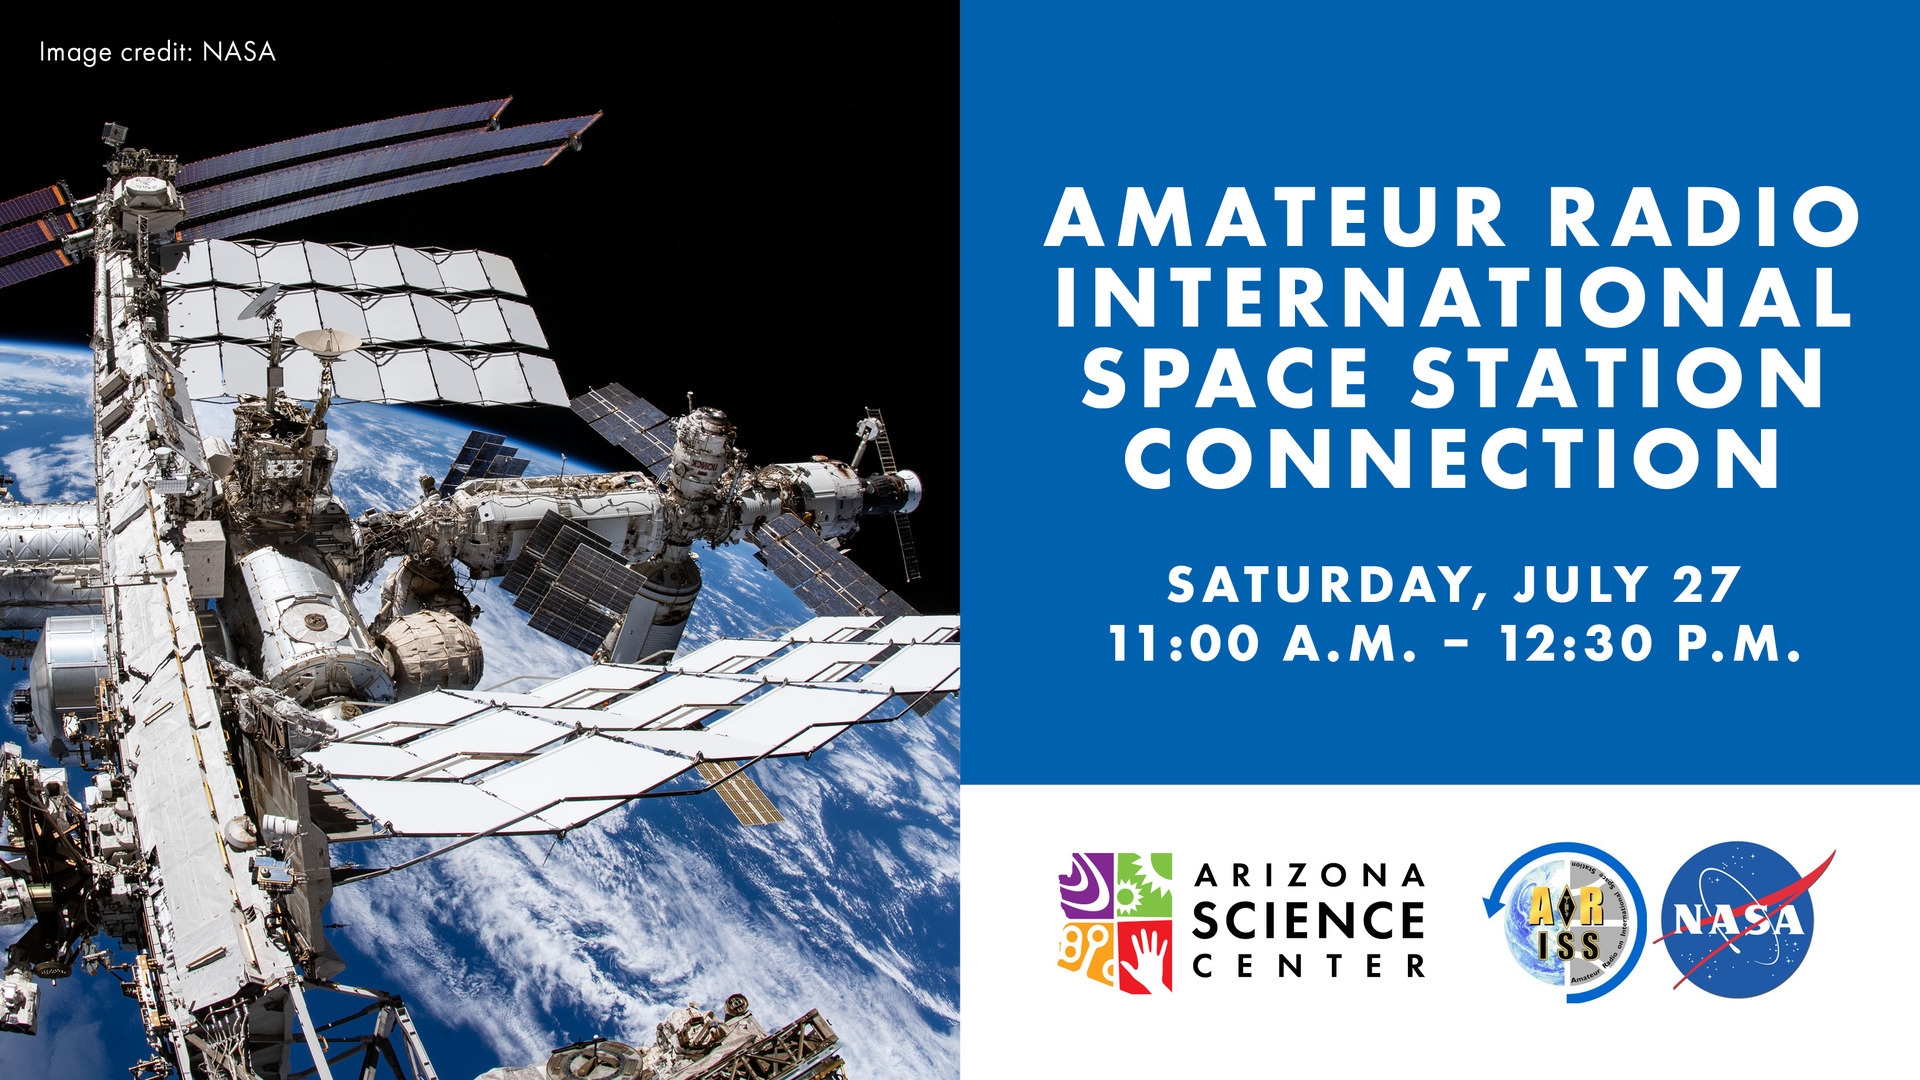 Arizona Science Center to Connect with the International Space Station